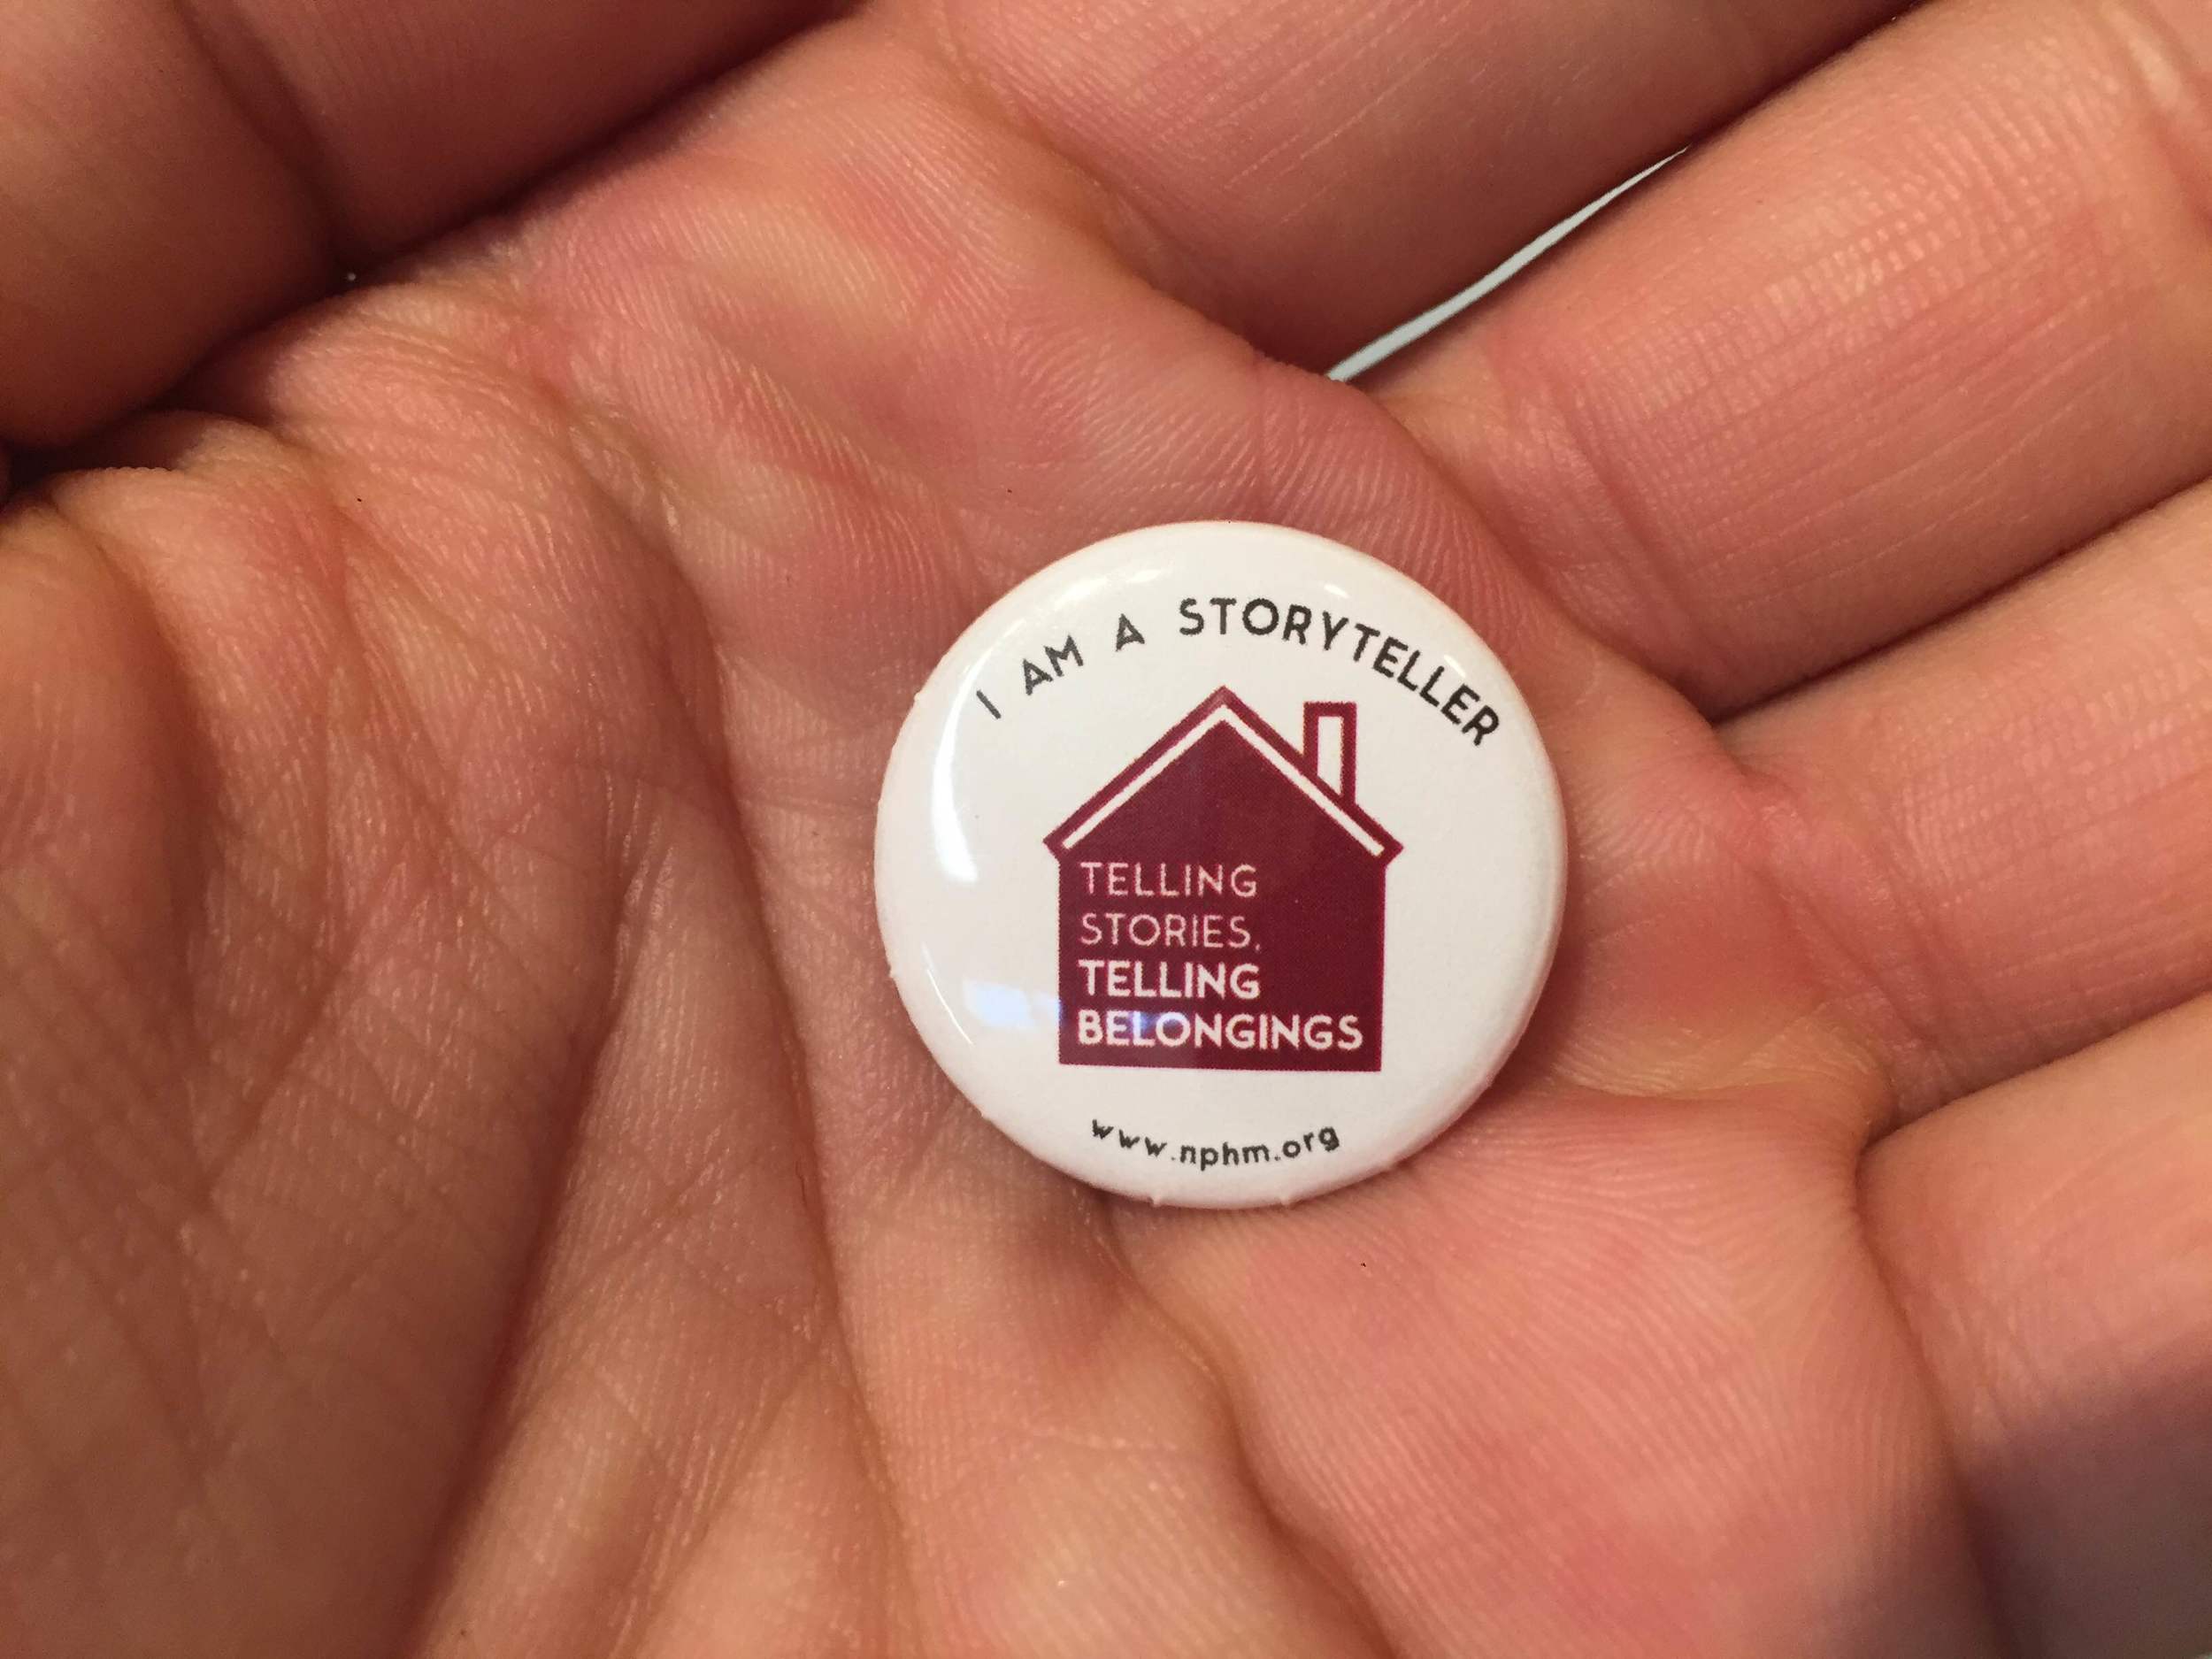  Event attendees received commemorative pins for the event emblazoned with "I am a Storyteller." 